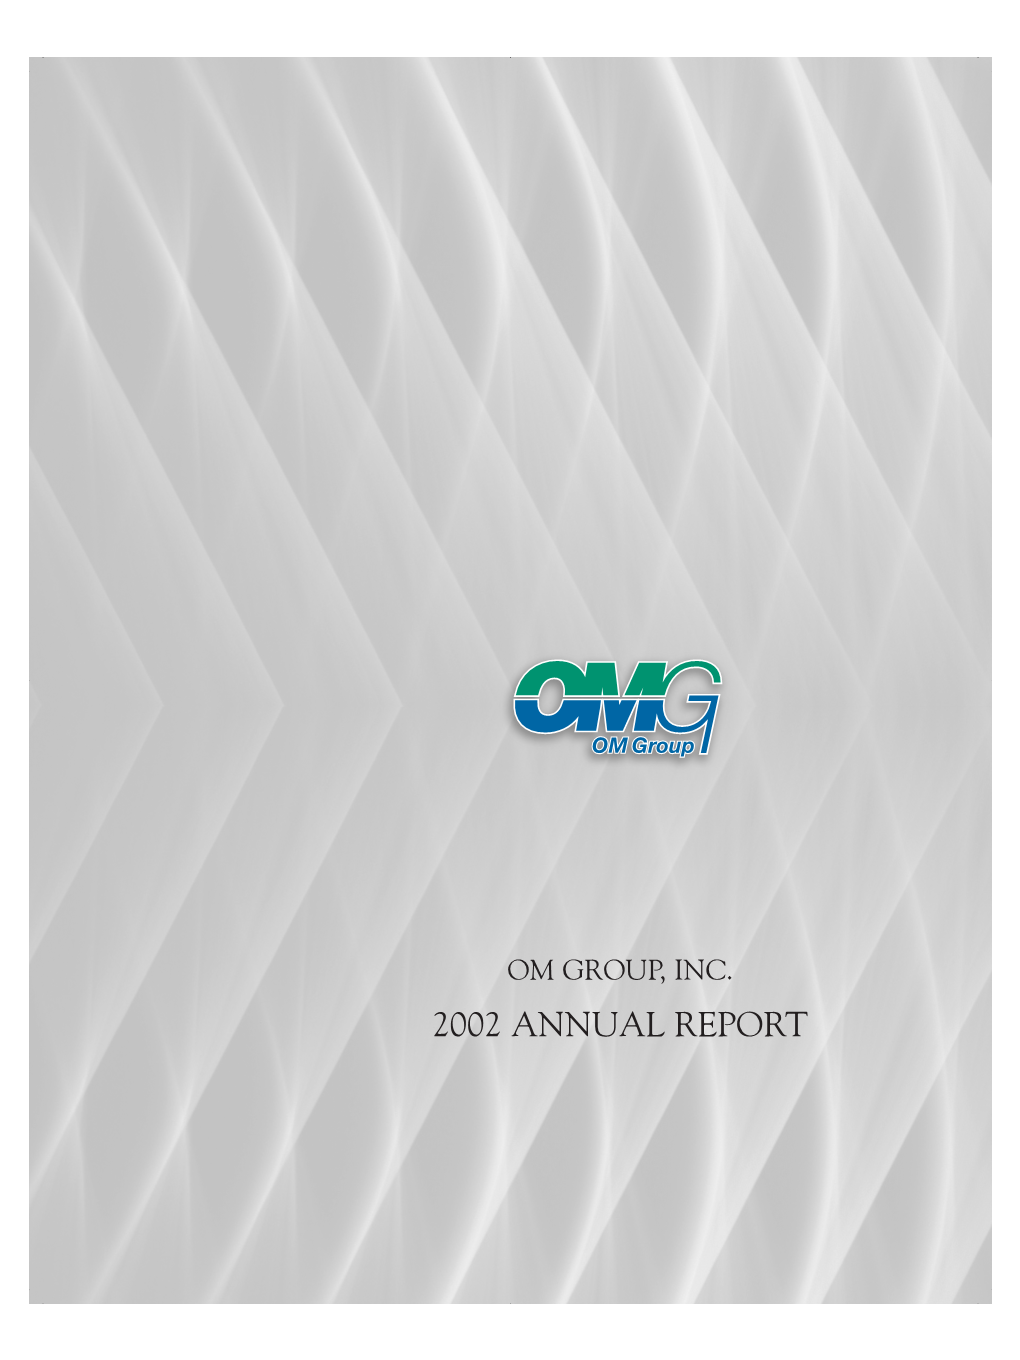 Om Group, Inc. 2002 Annual Report Dear Fellow Shareowners